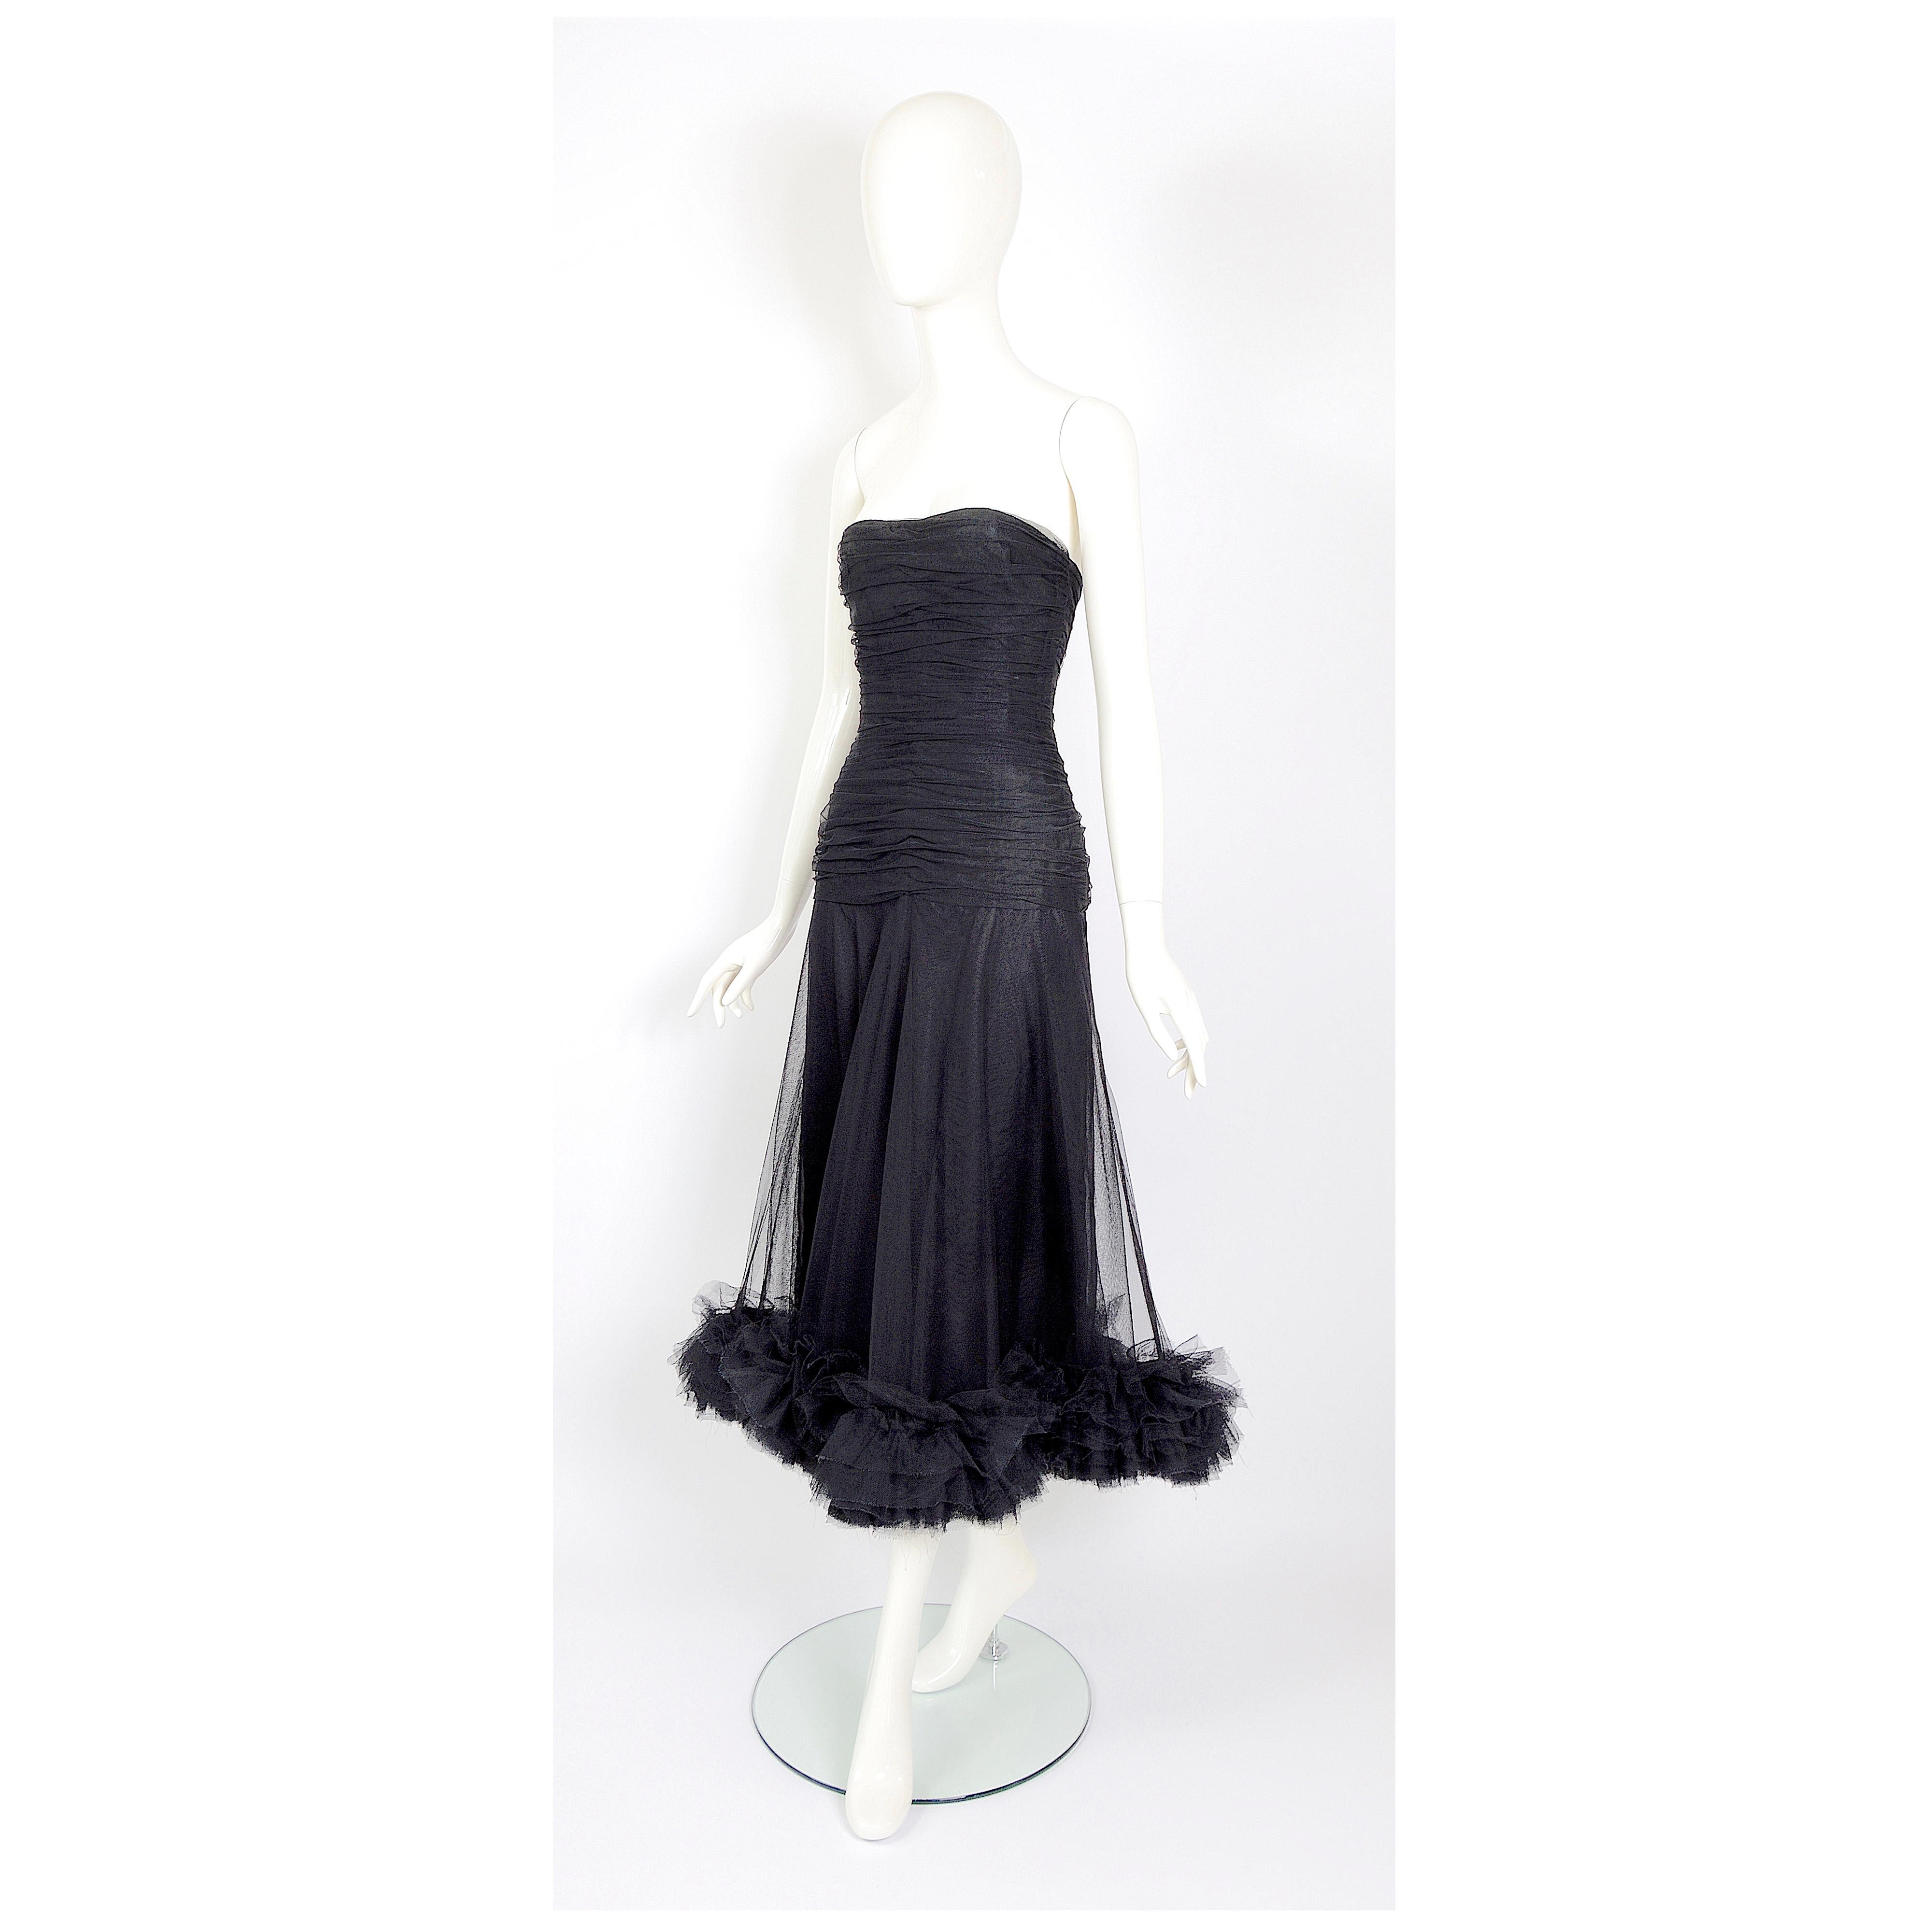 Christian Dior by Marc Bohan numbered couture black tulle dress.
Christian Dior, the founder of the fashion house passed away in 1957,  Marc Bohan succeeded Yves Saint Laurent in 1960.
A strapless drop-waist sheath of horizontally gathered black